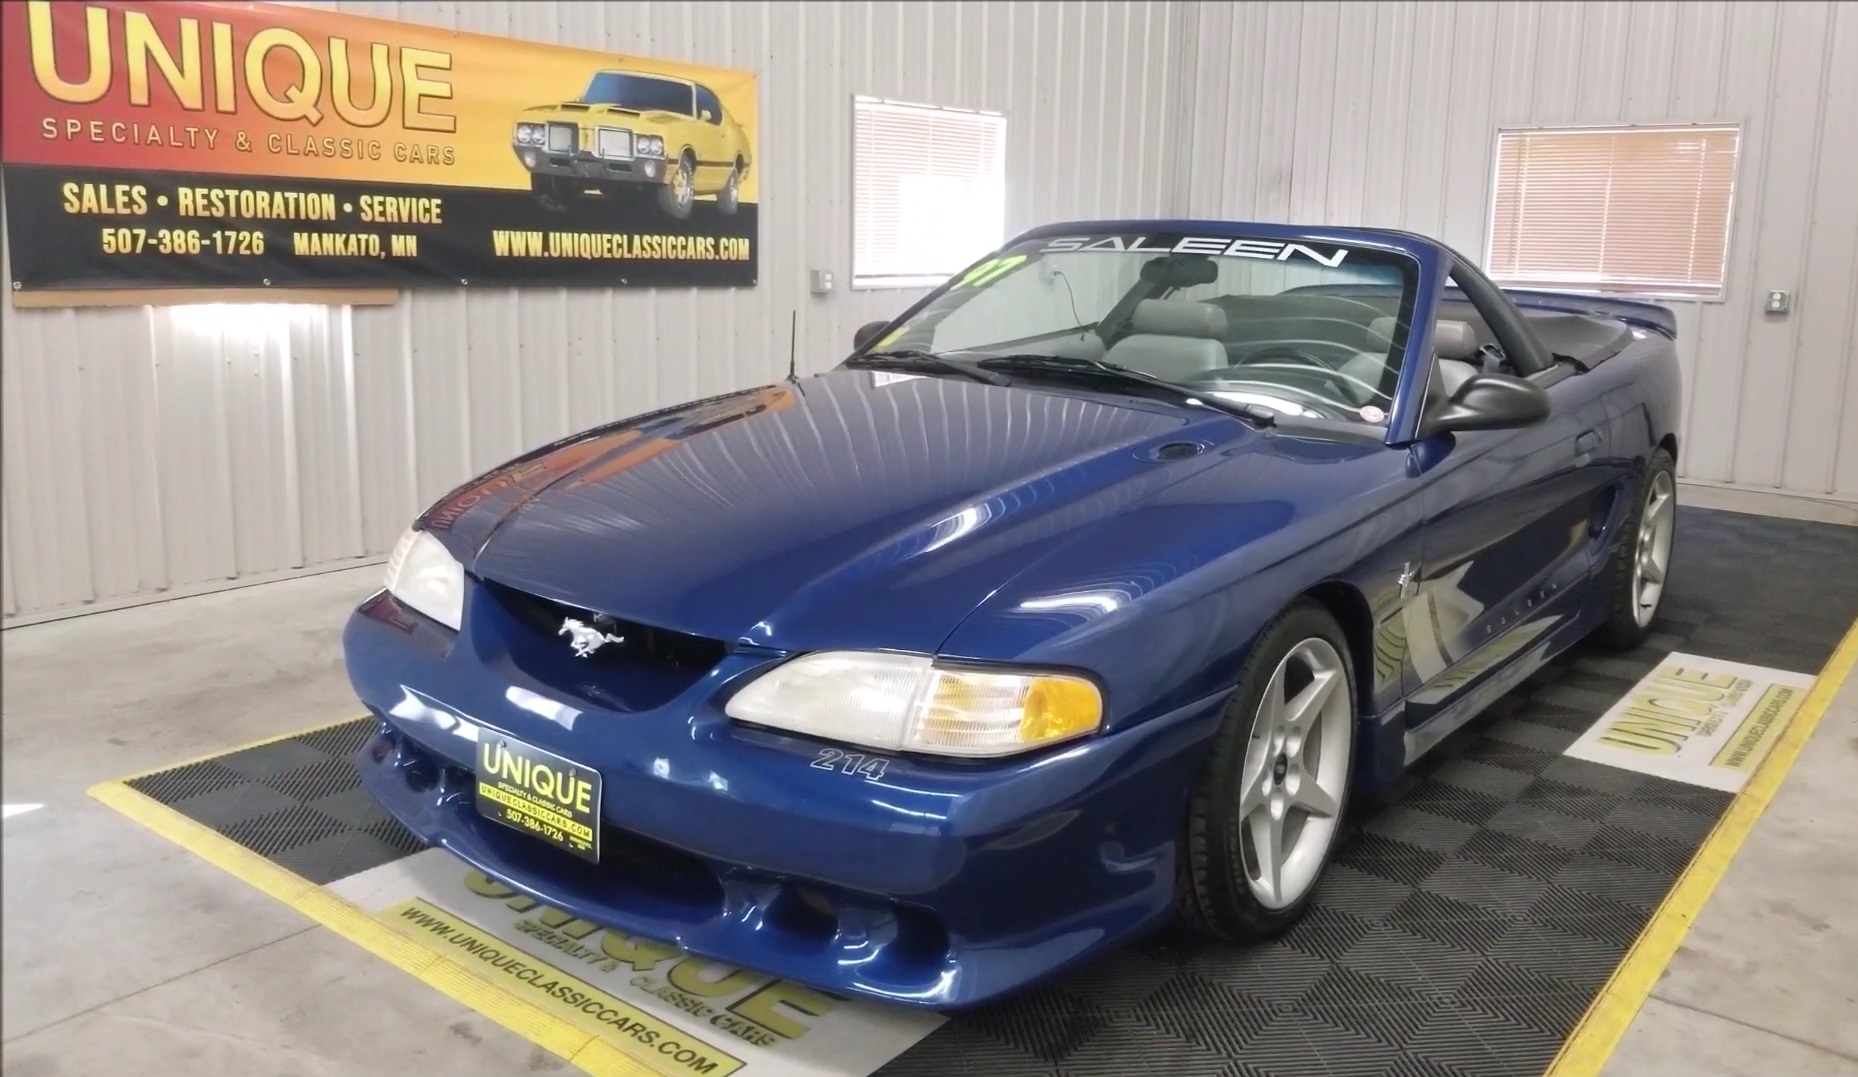 Video: 1997 Ford Mustang Saleen S281 Convertible In-Depth Tour